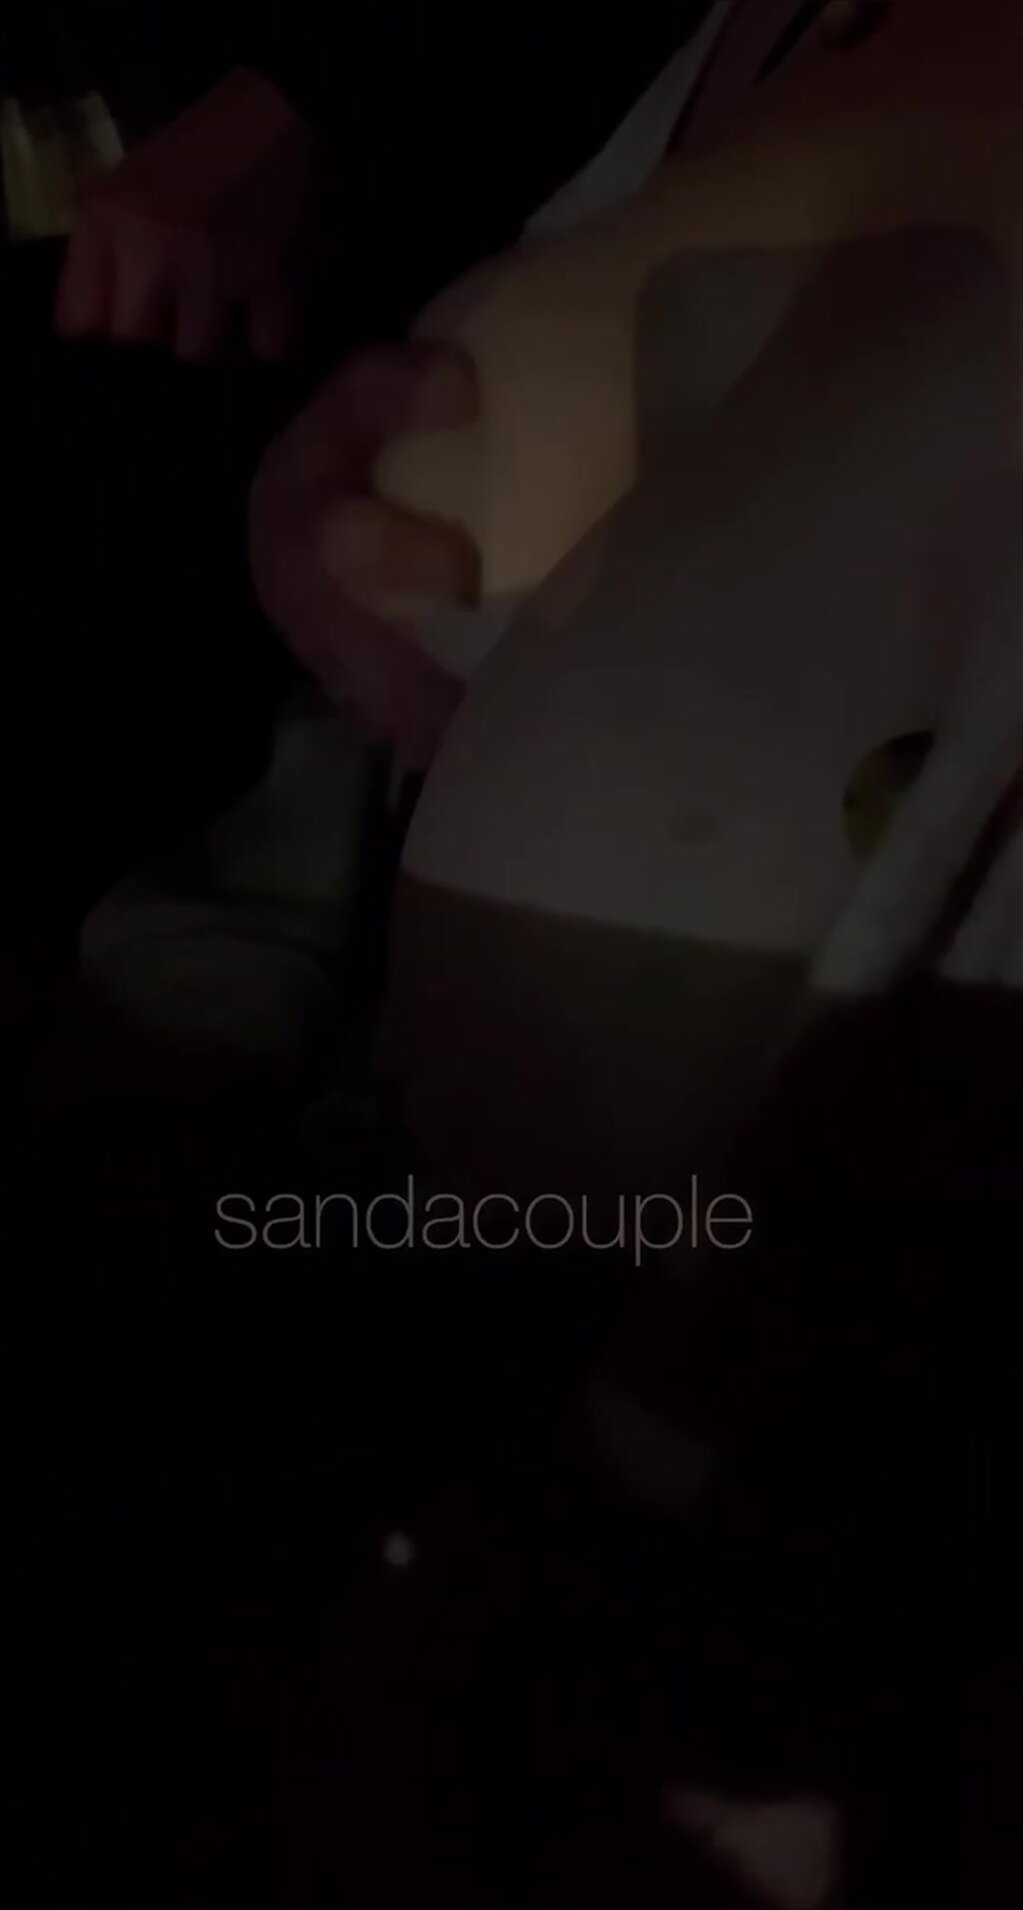 Asking a student on campus for directions and letting him rub my tits as a thank you. Second angle, filmed by hubby. Listen to the audio if you think it’s fake